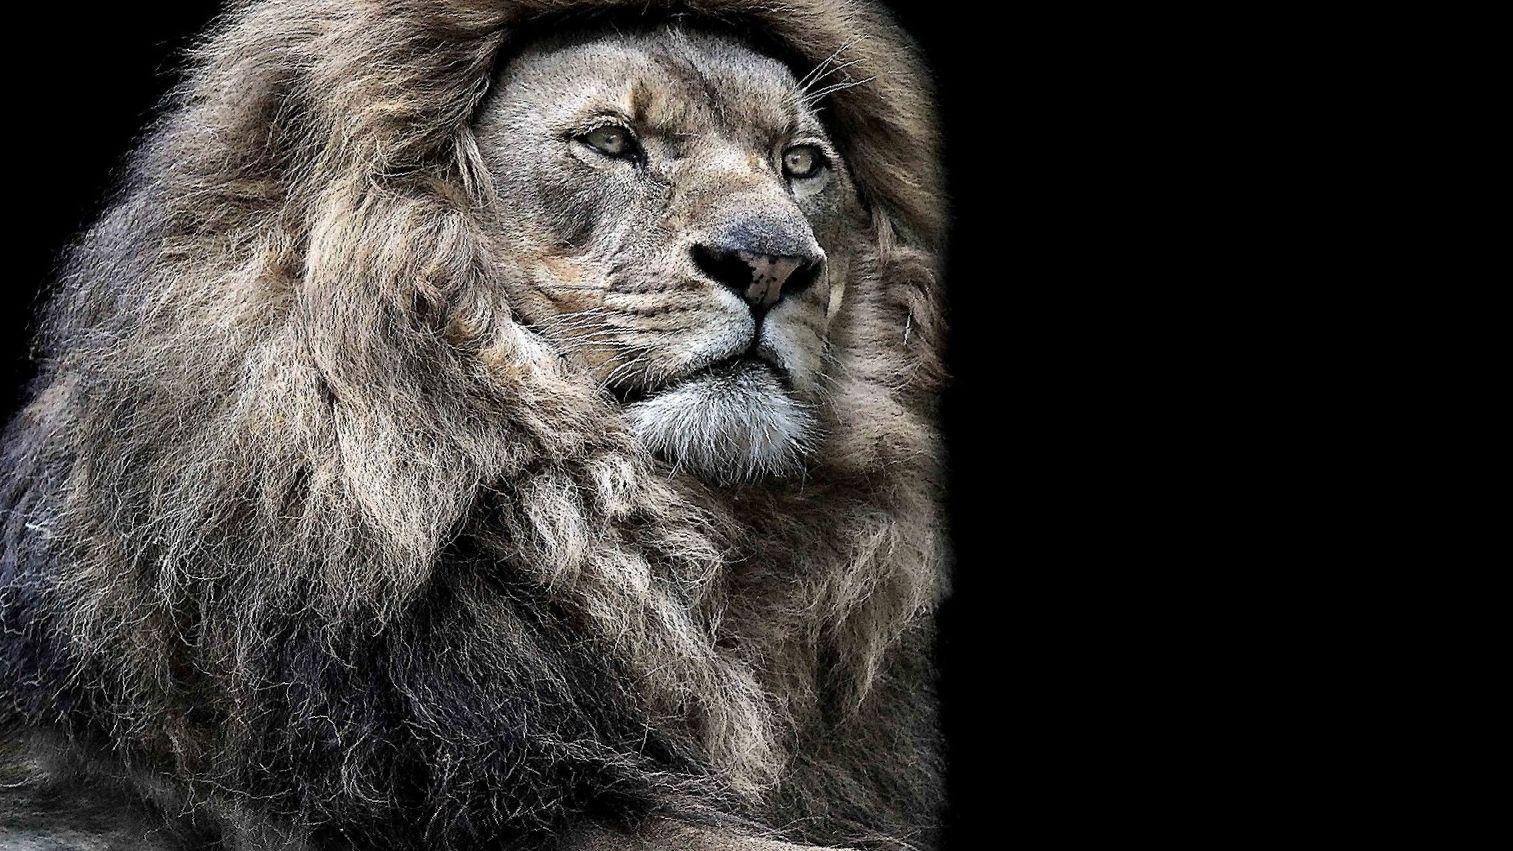 Lion Wallpaper Pictures HD Images Free Photos 4K for Android - APK Download